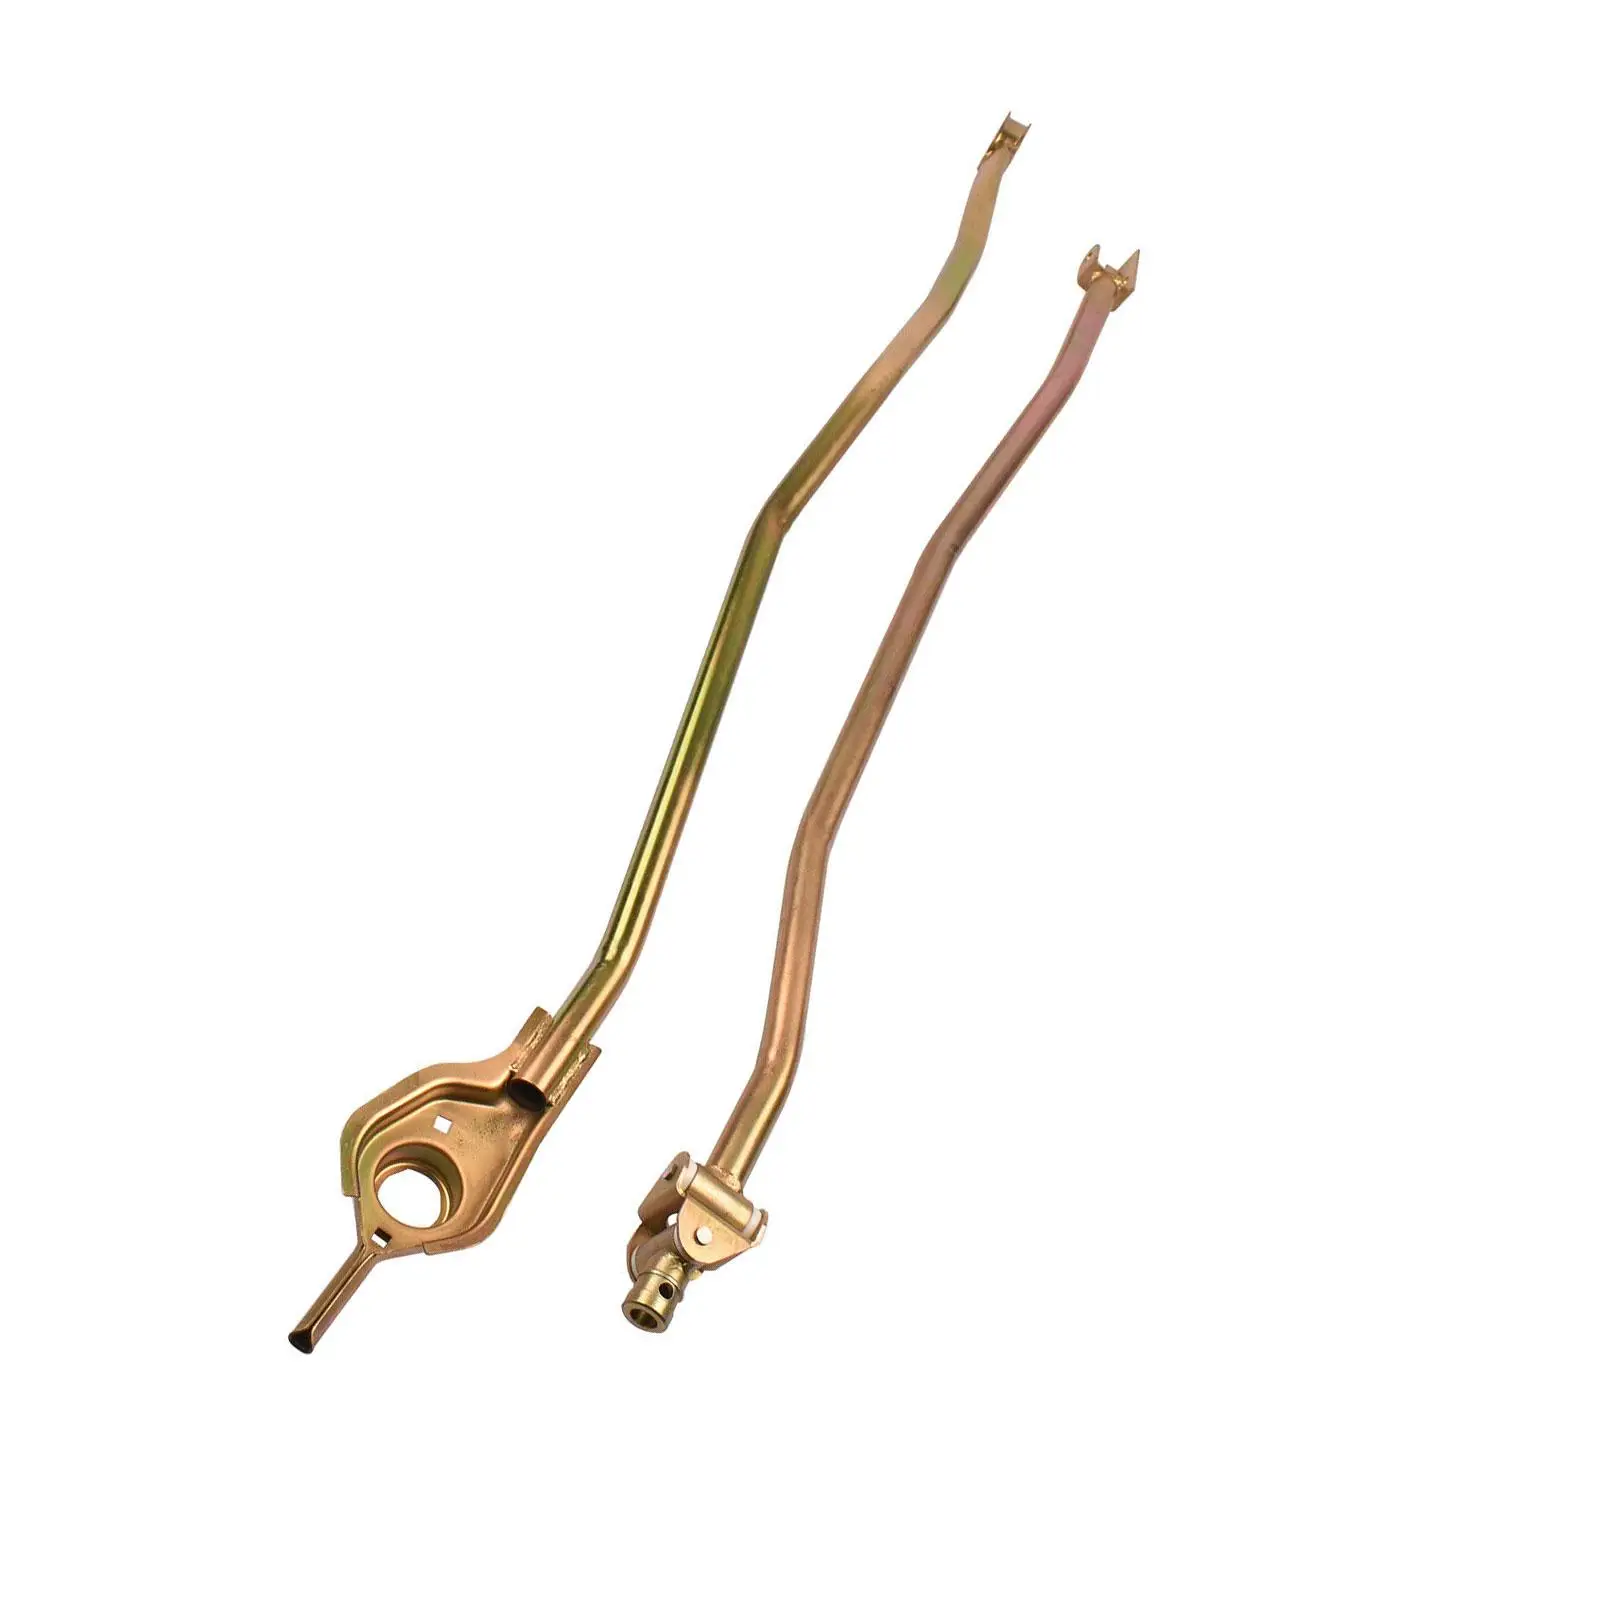 Shift Linkage Egblink for Honda Civic B Series Swap Direct Replaces